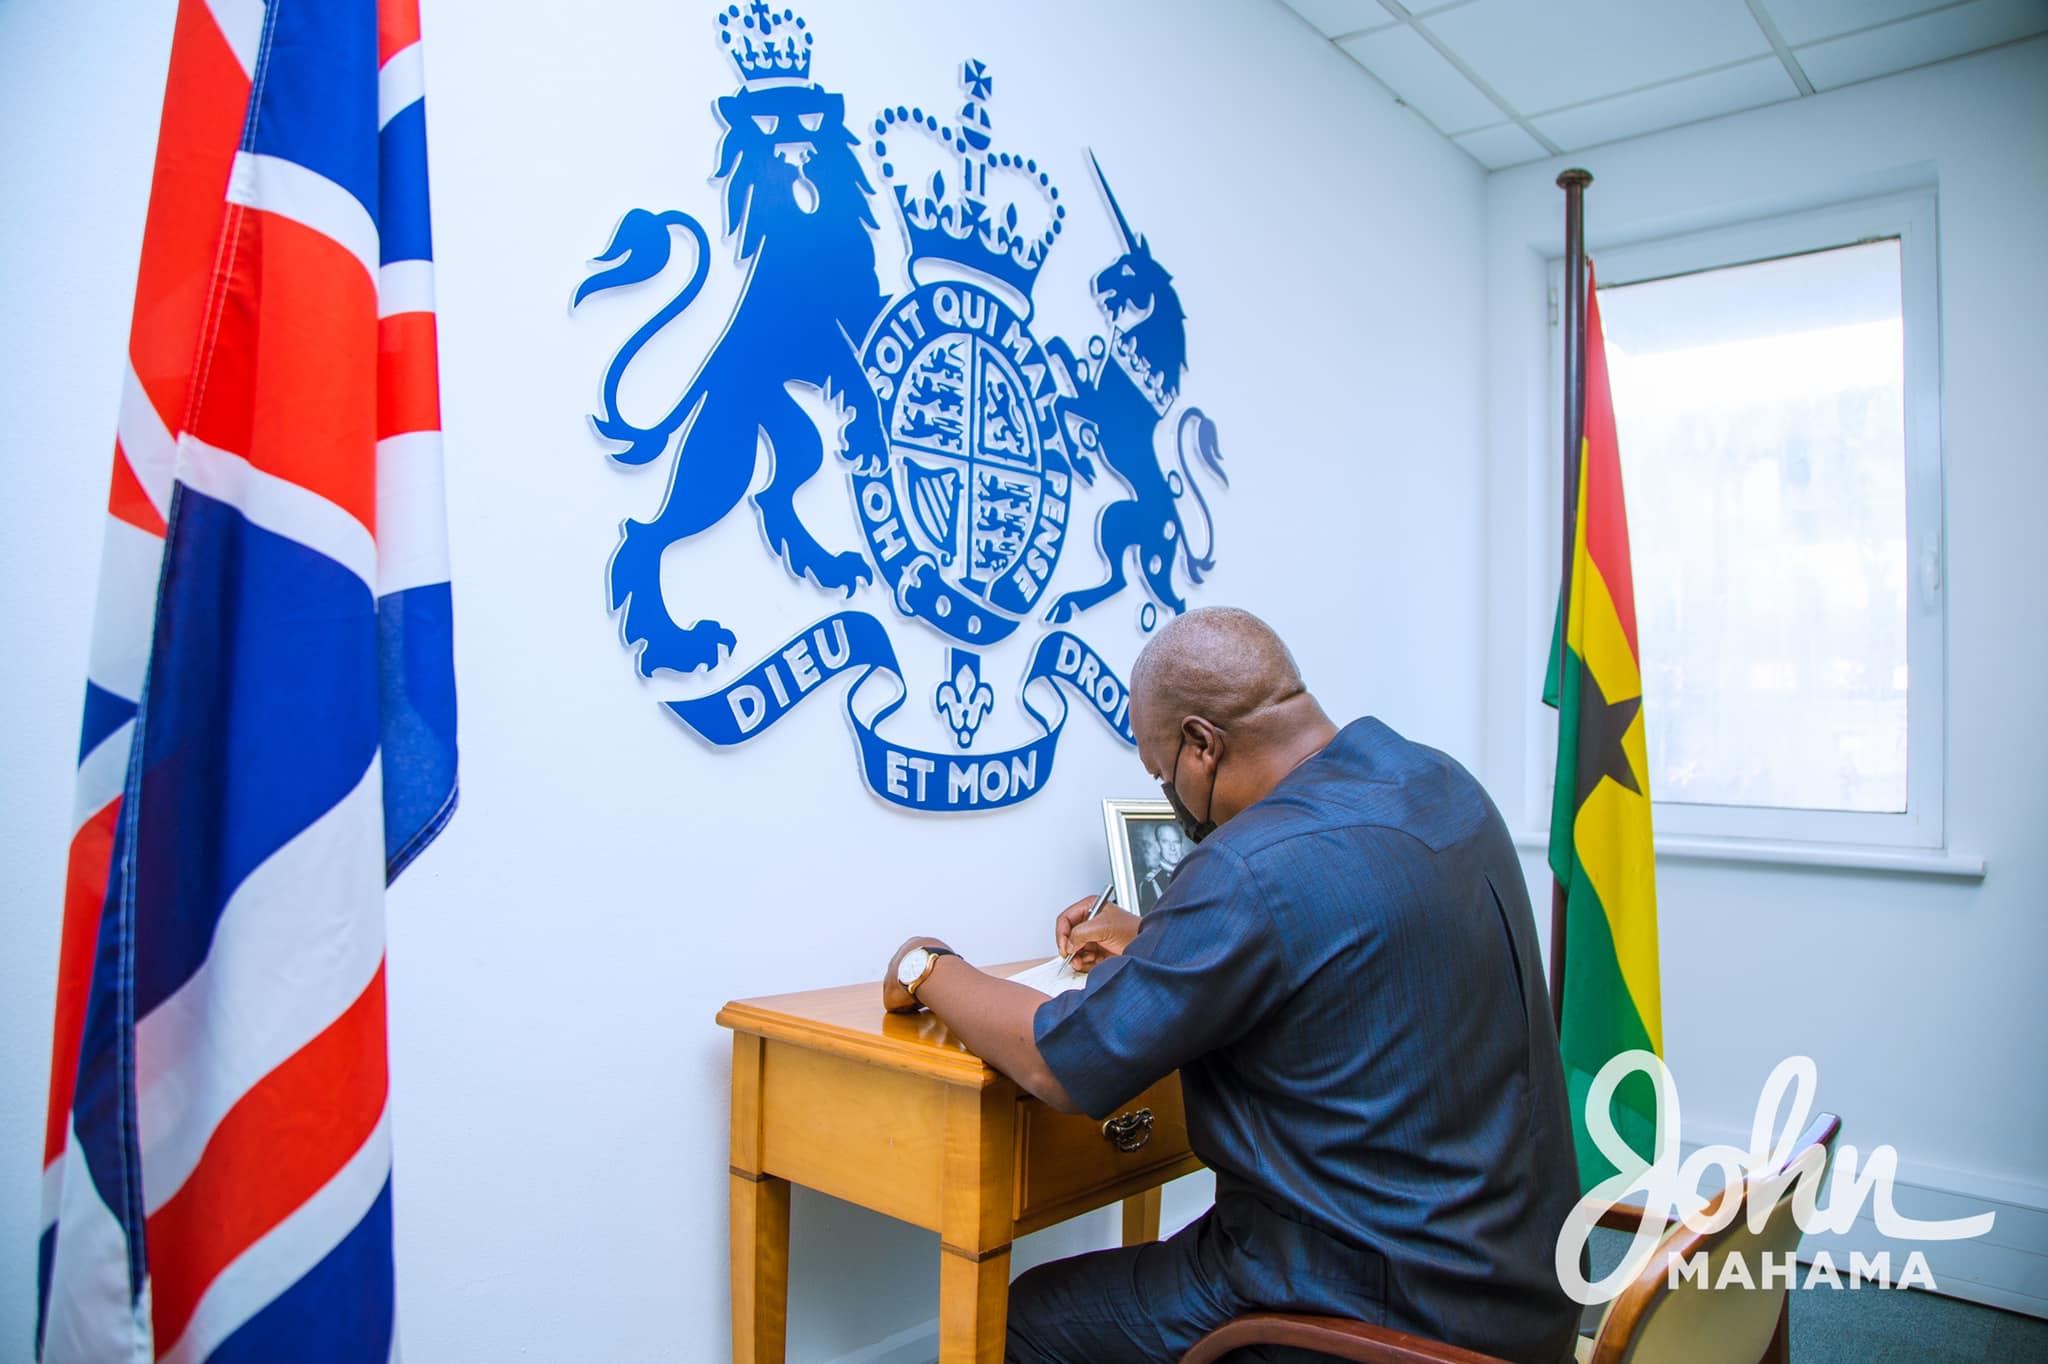 Mahama signs book of condolence opened for Prince Philip at British High Commission